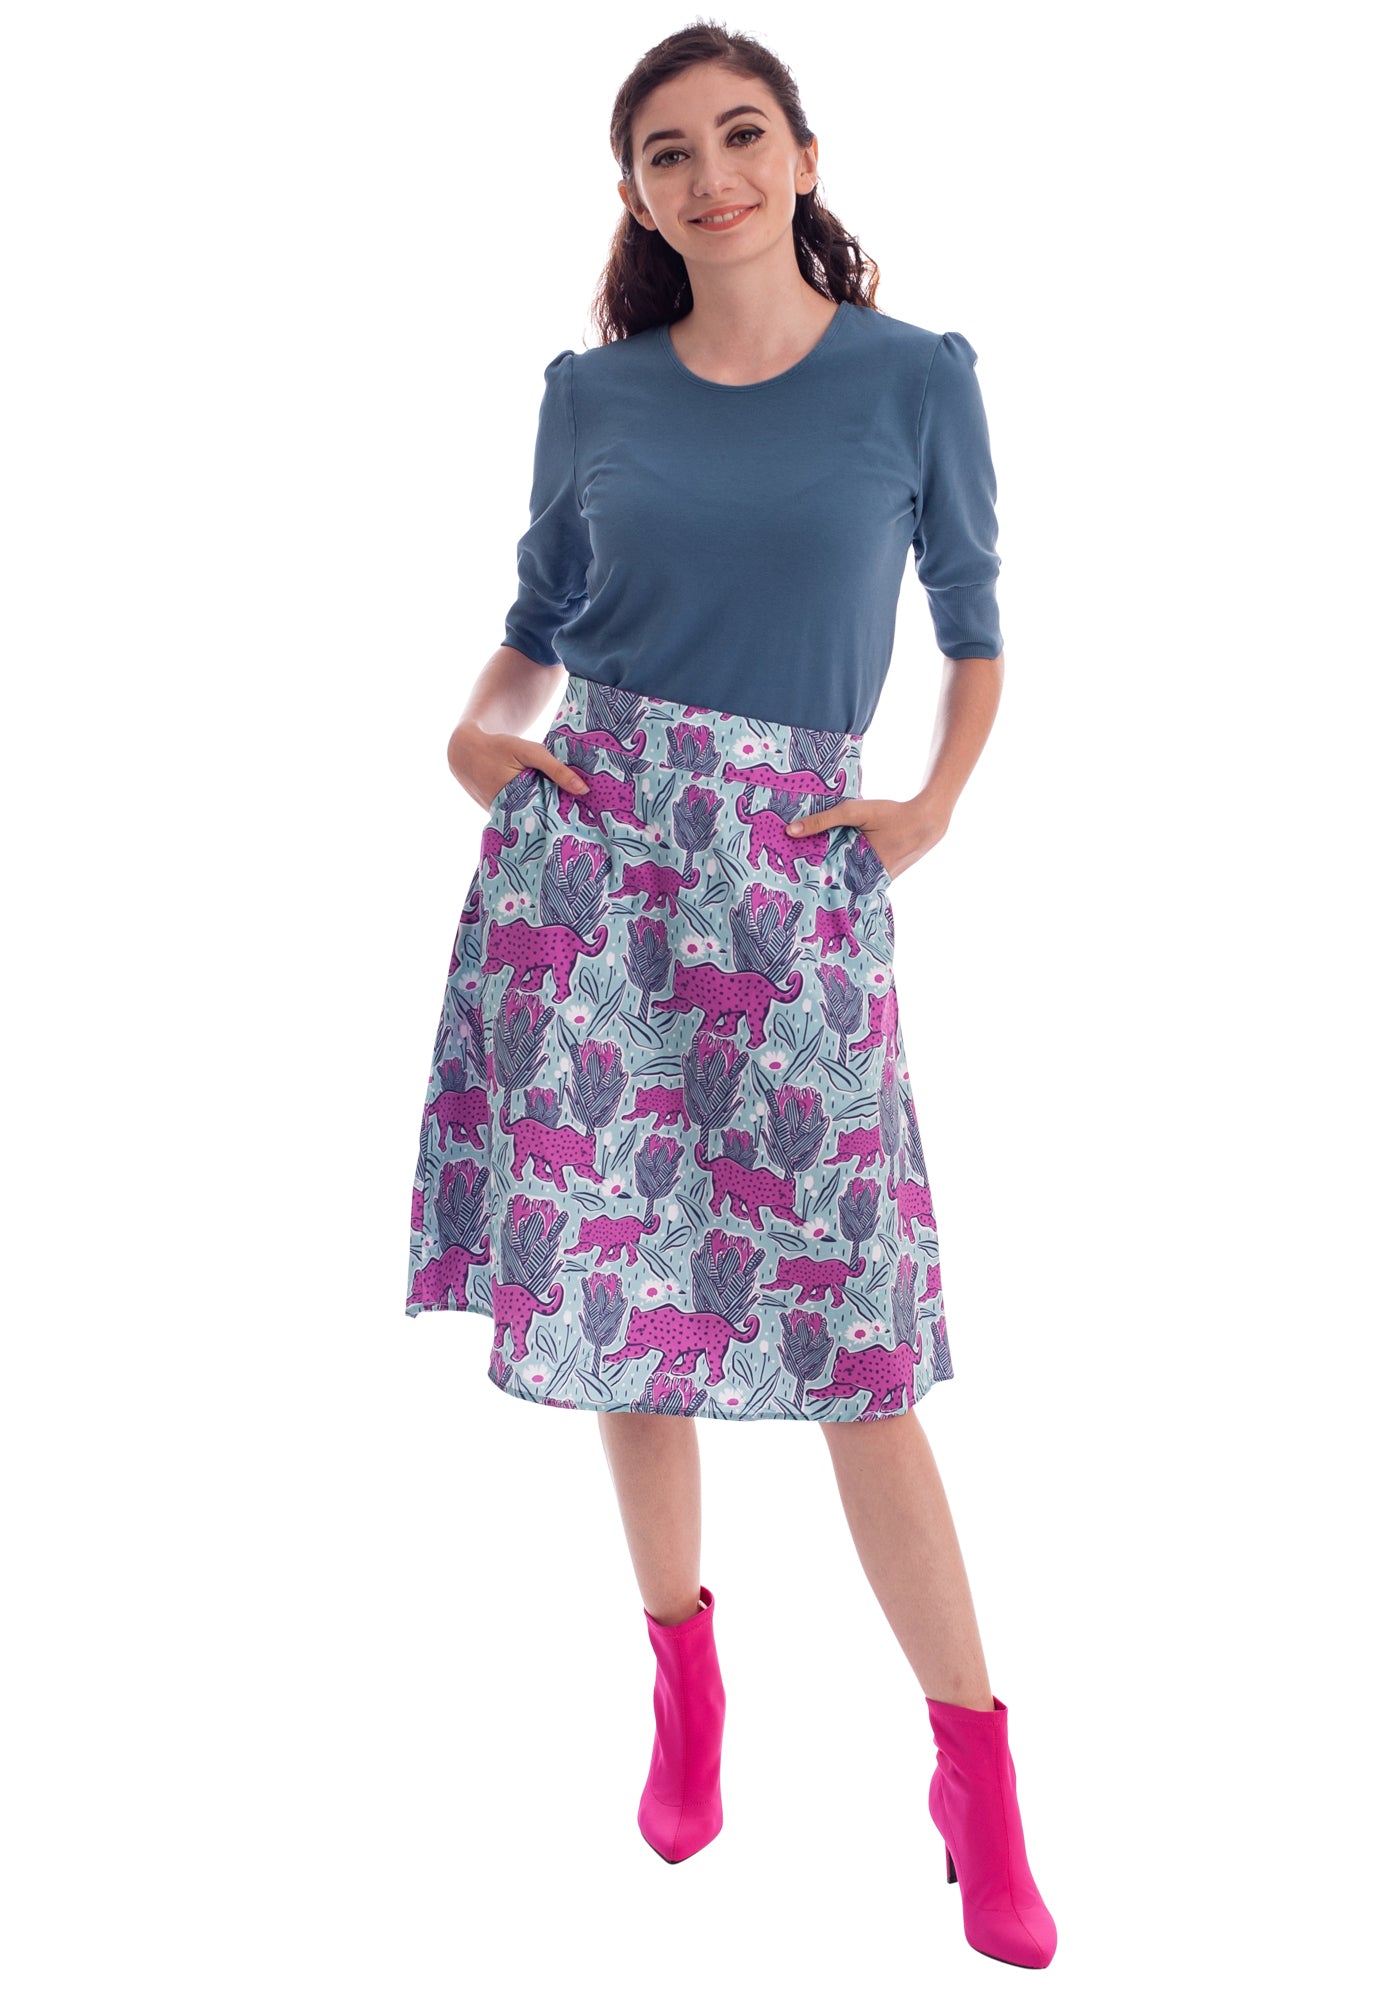 Pink and mint green a-line knee length skirt with flower and jaguar print on model with grey tee and pink ankle boots